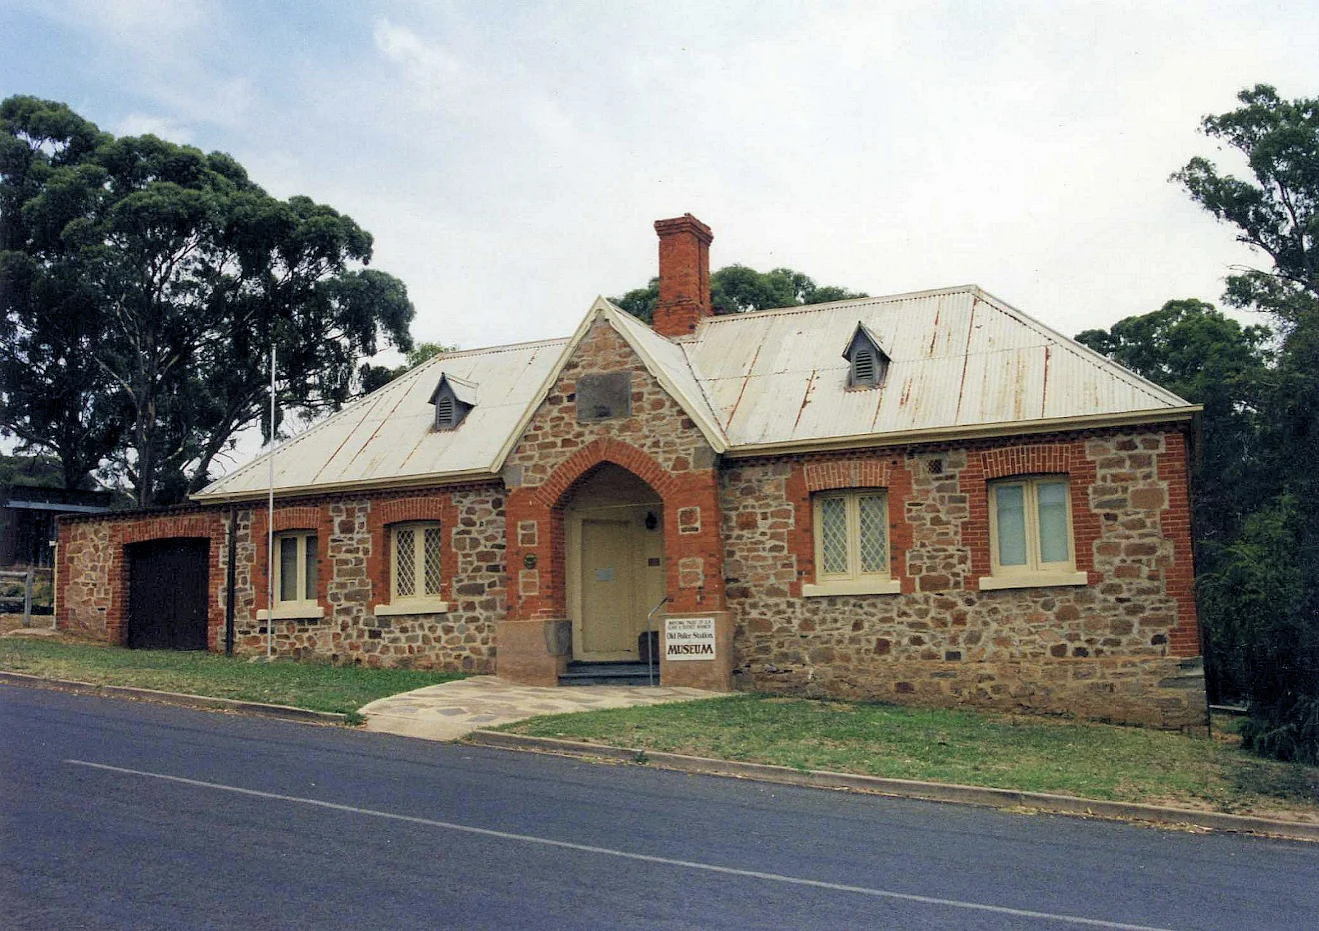 Original Court House and barracks for the Mounted Police, Clare